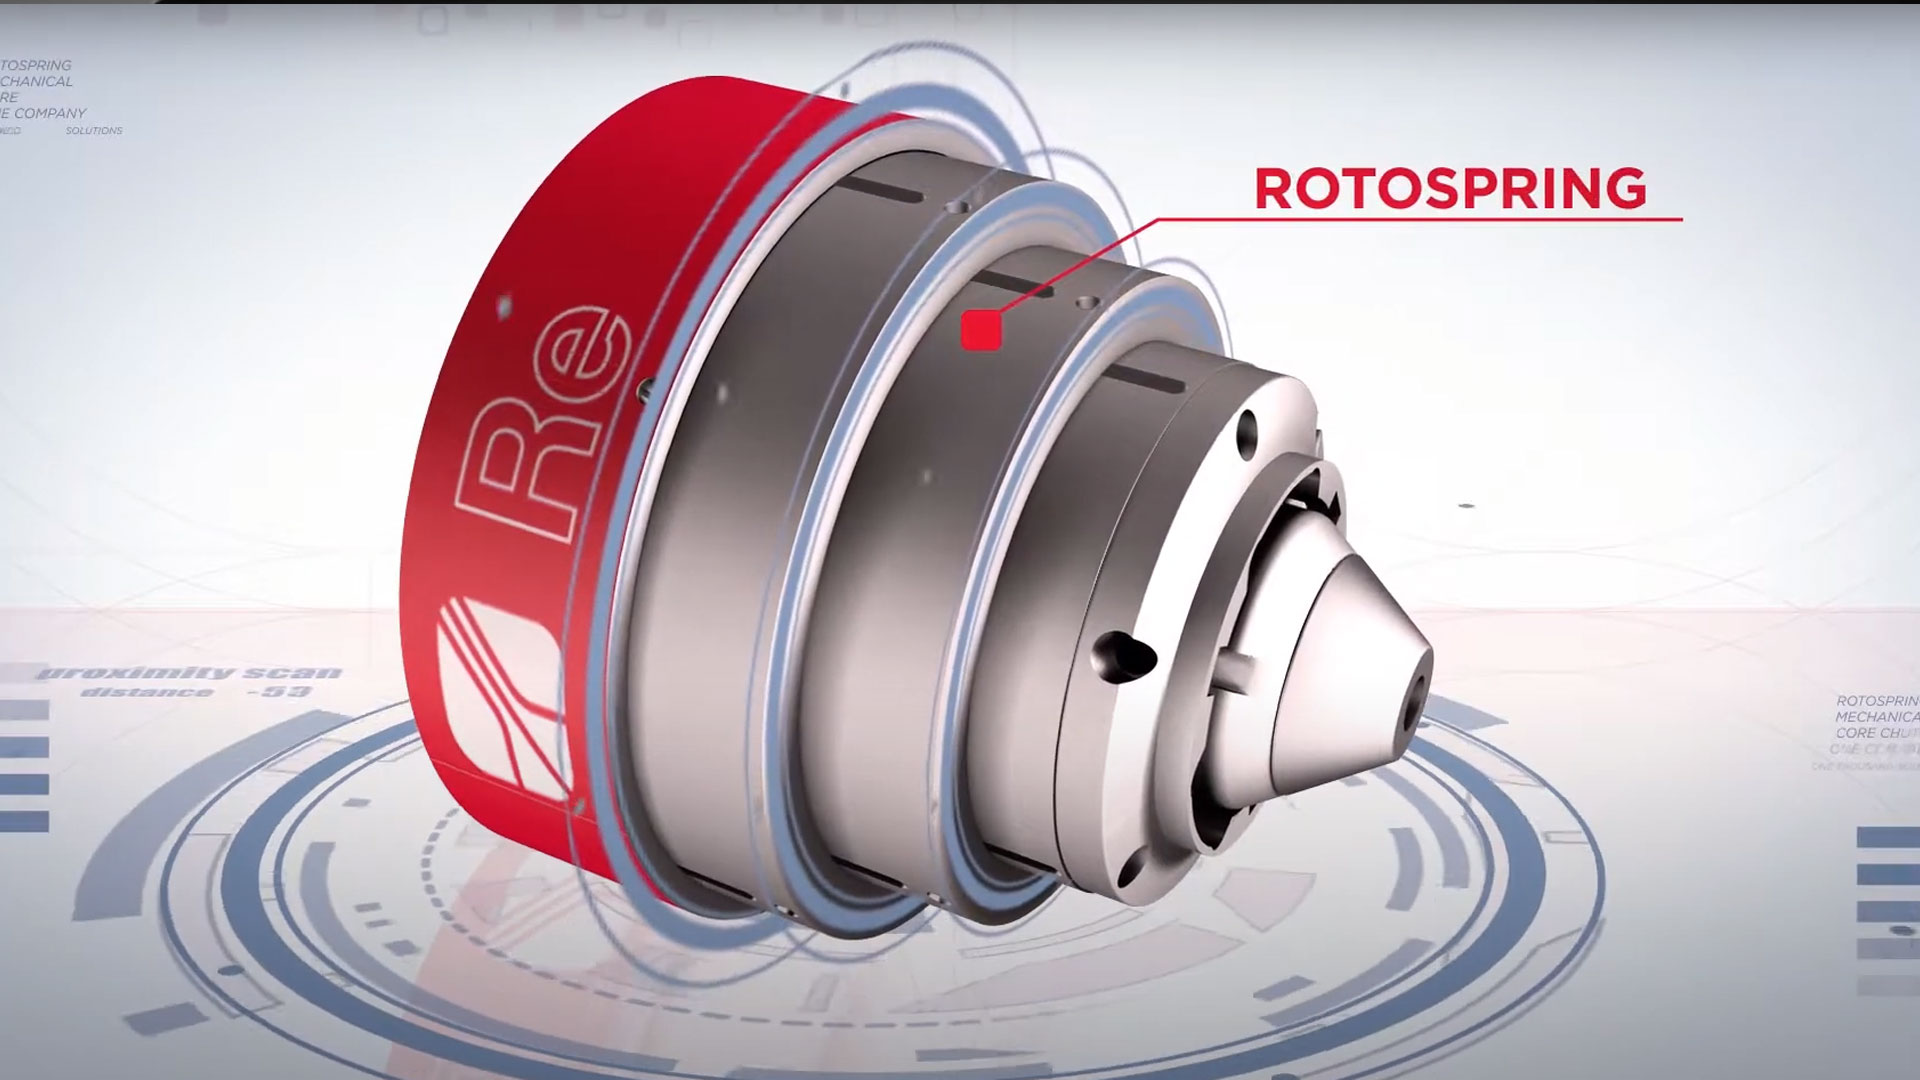 RE PRODUCT - Rotospring - VIDEO 3D